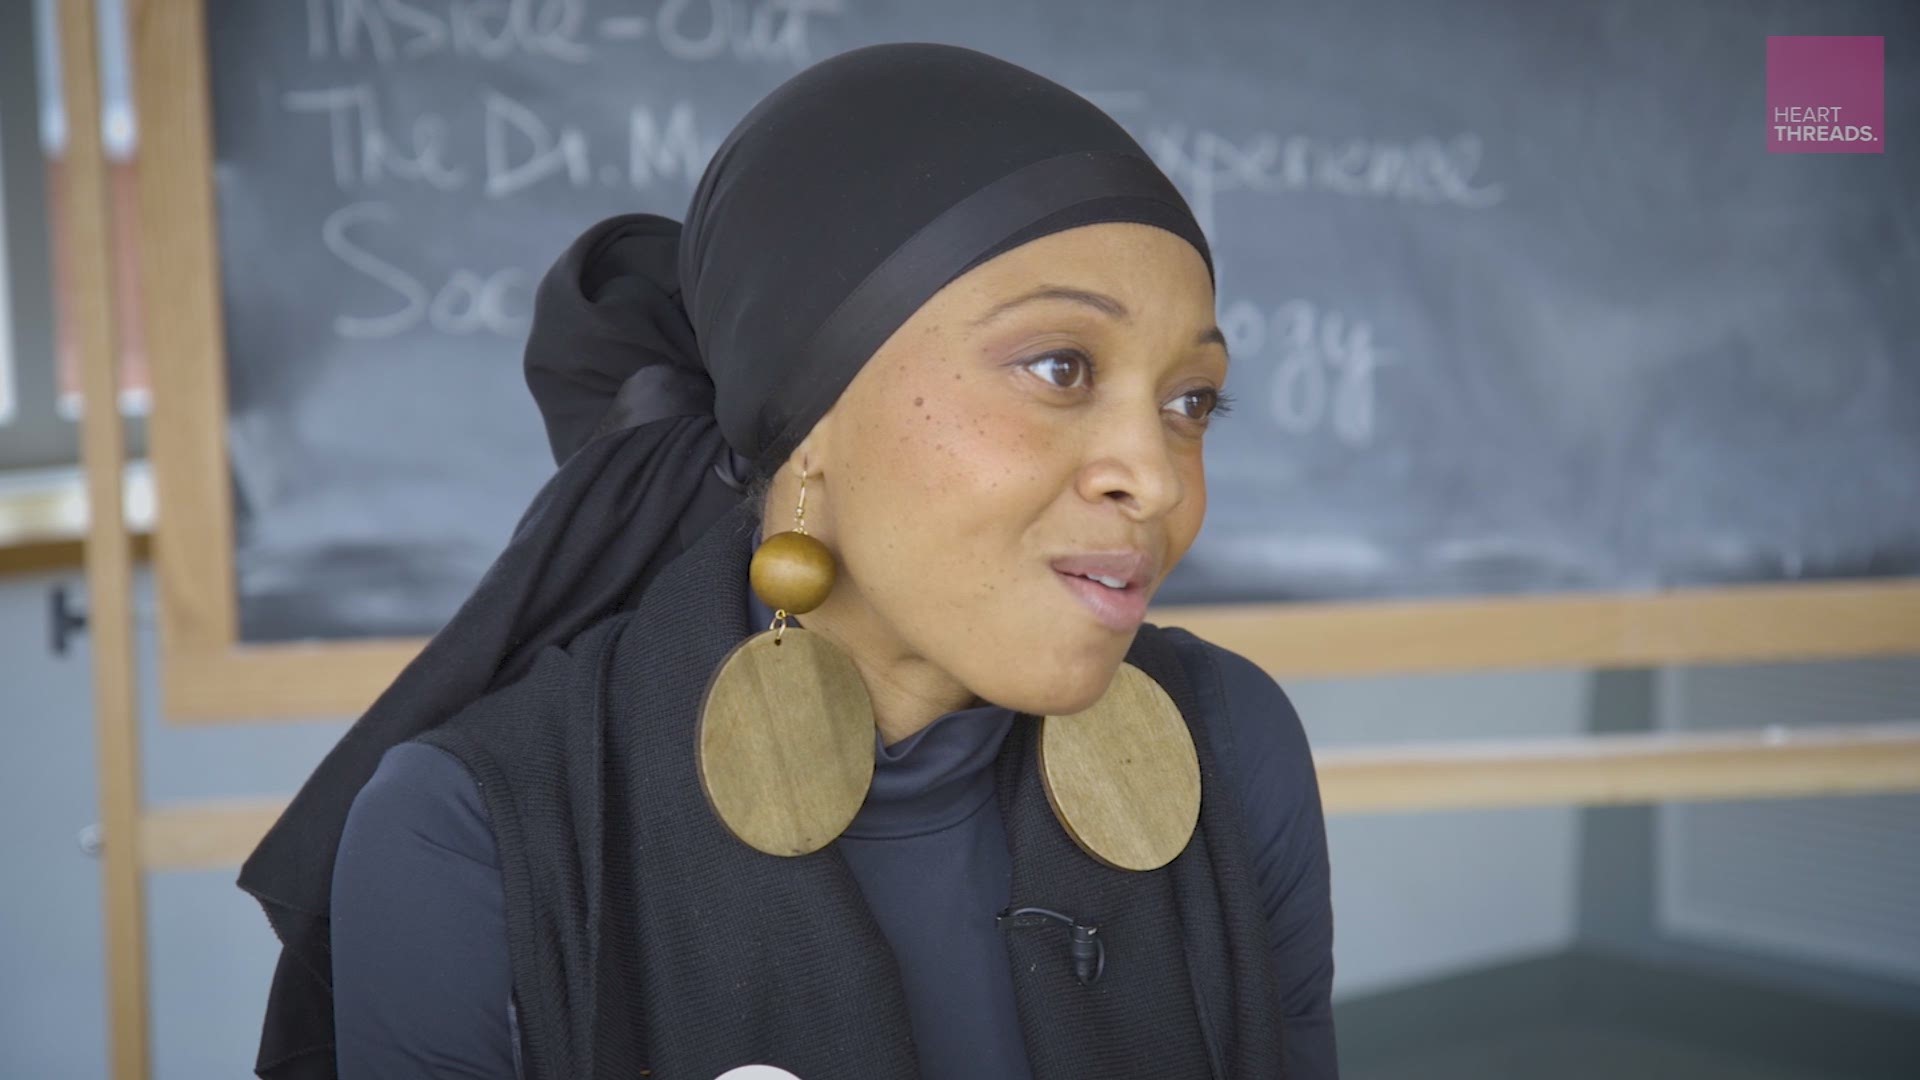 By bringing her college students into prison for class, Dr. Muhammad is changing the stigma associated with life behind bars and providing the gift of education.